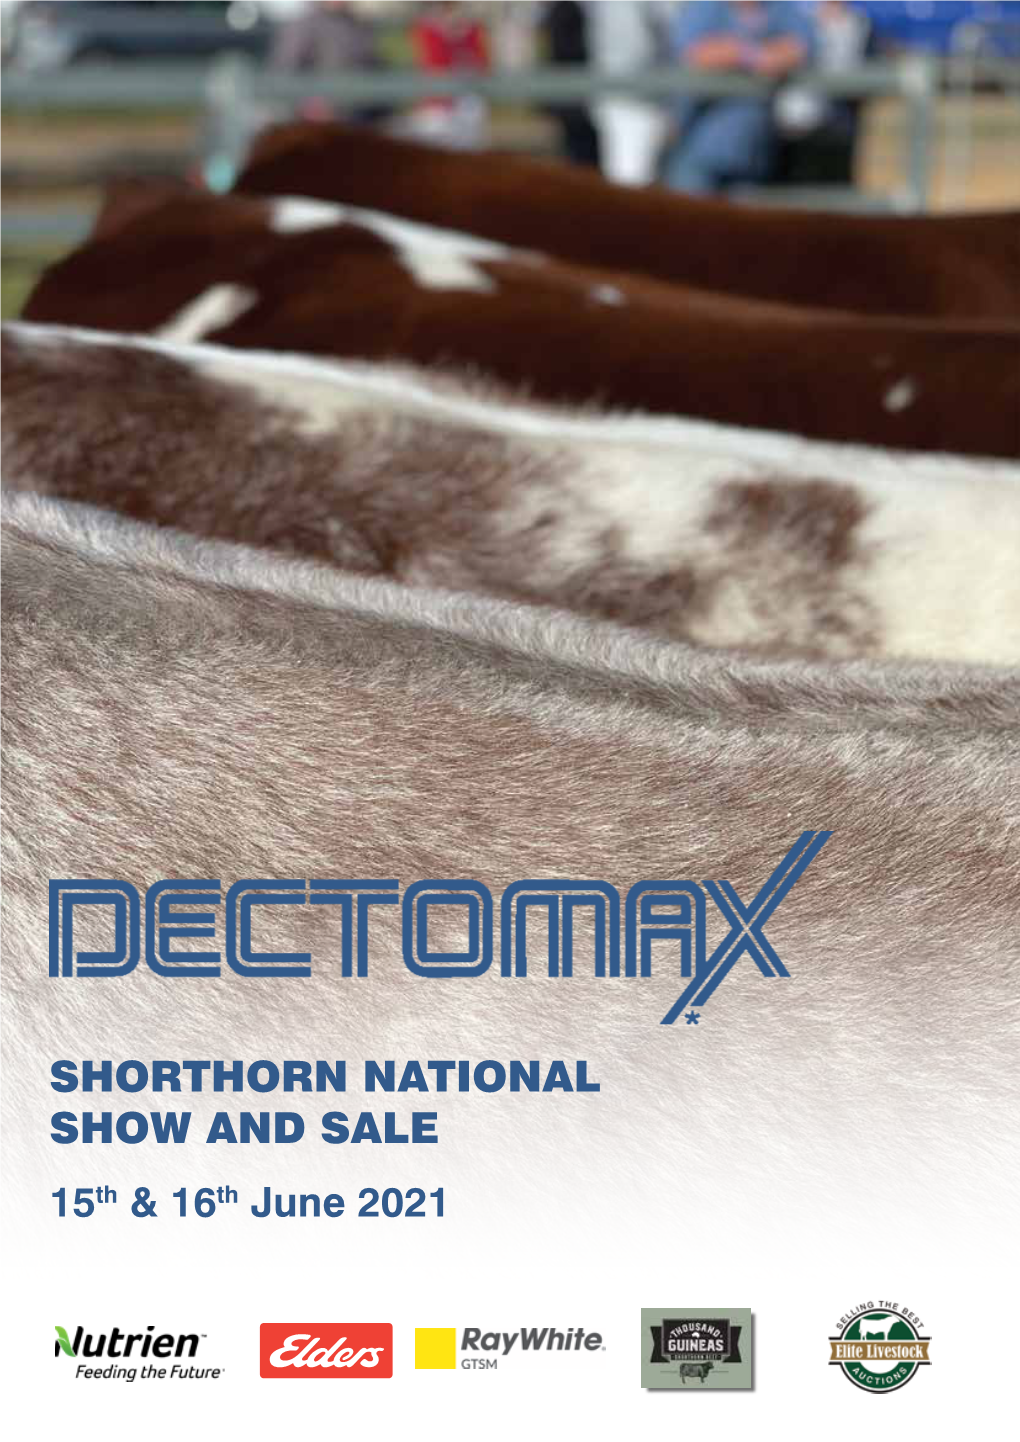 Shorthorn National Show and